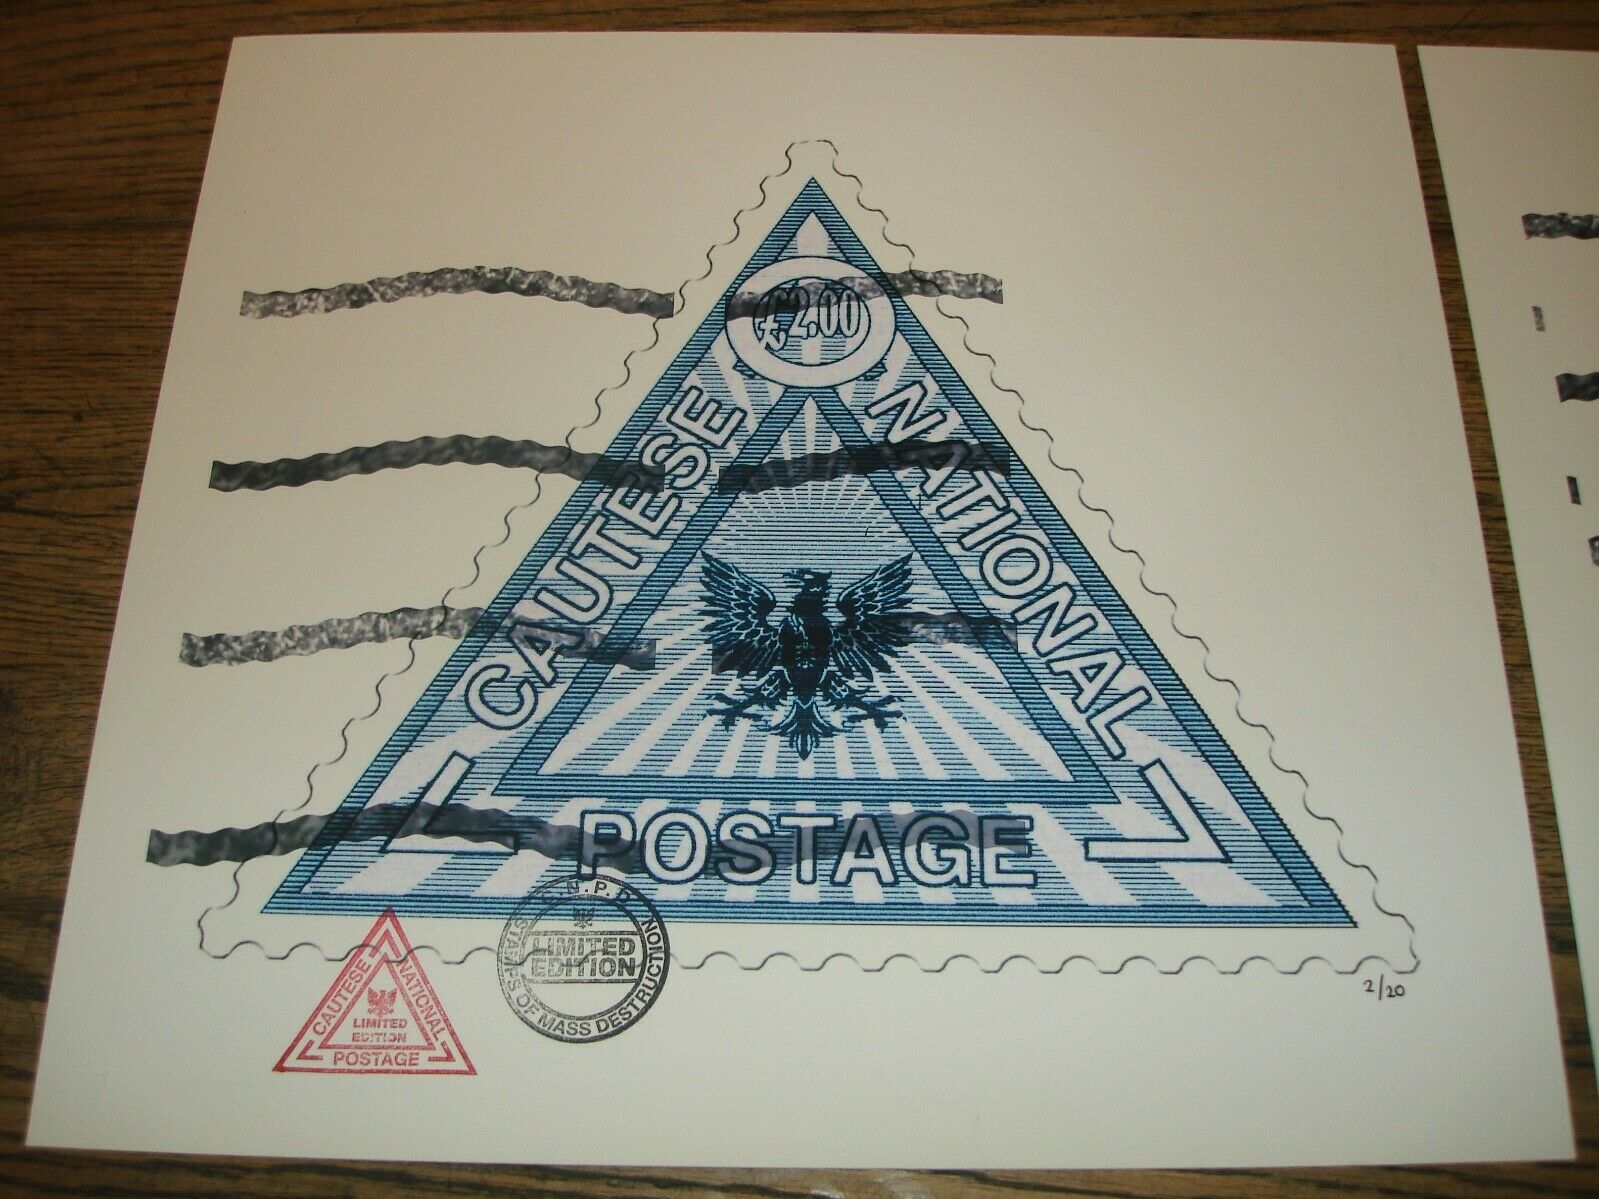 James Cauty (1956 - ) CNPD £2, £3 and £4 Triangle Stamps - Set of 3 Pop Editions COA (2005) - Image 4 of 13